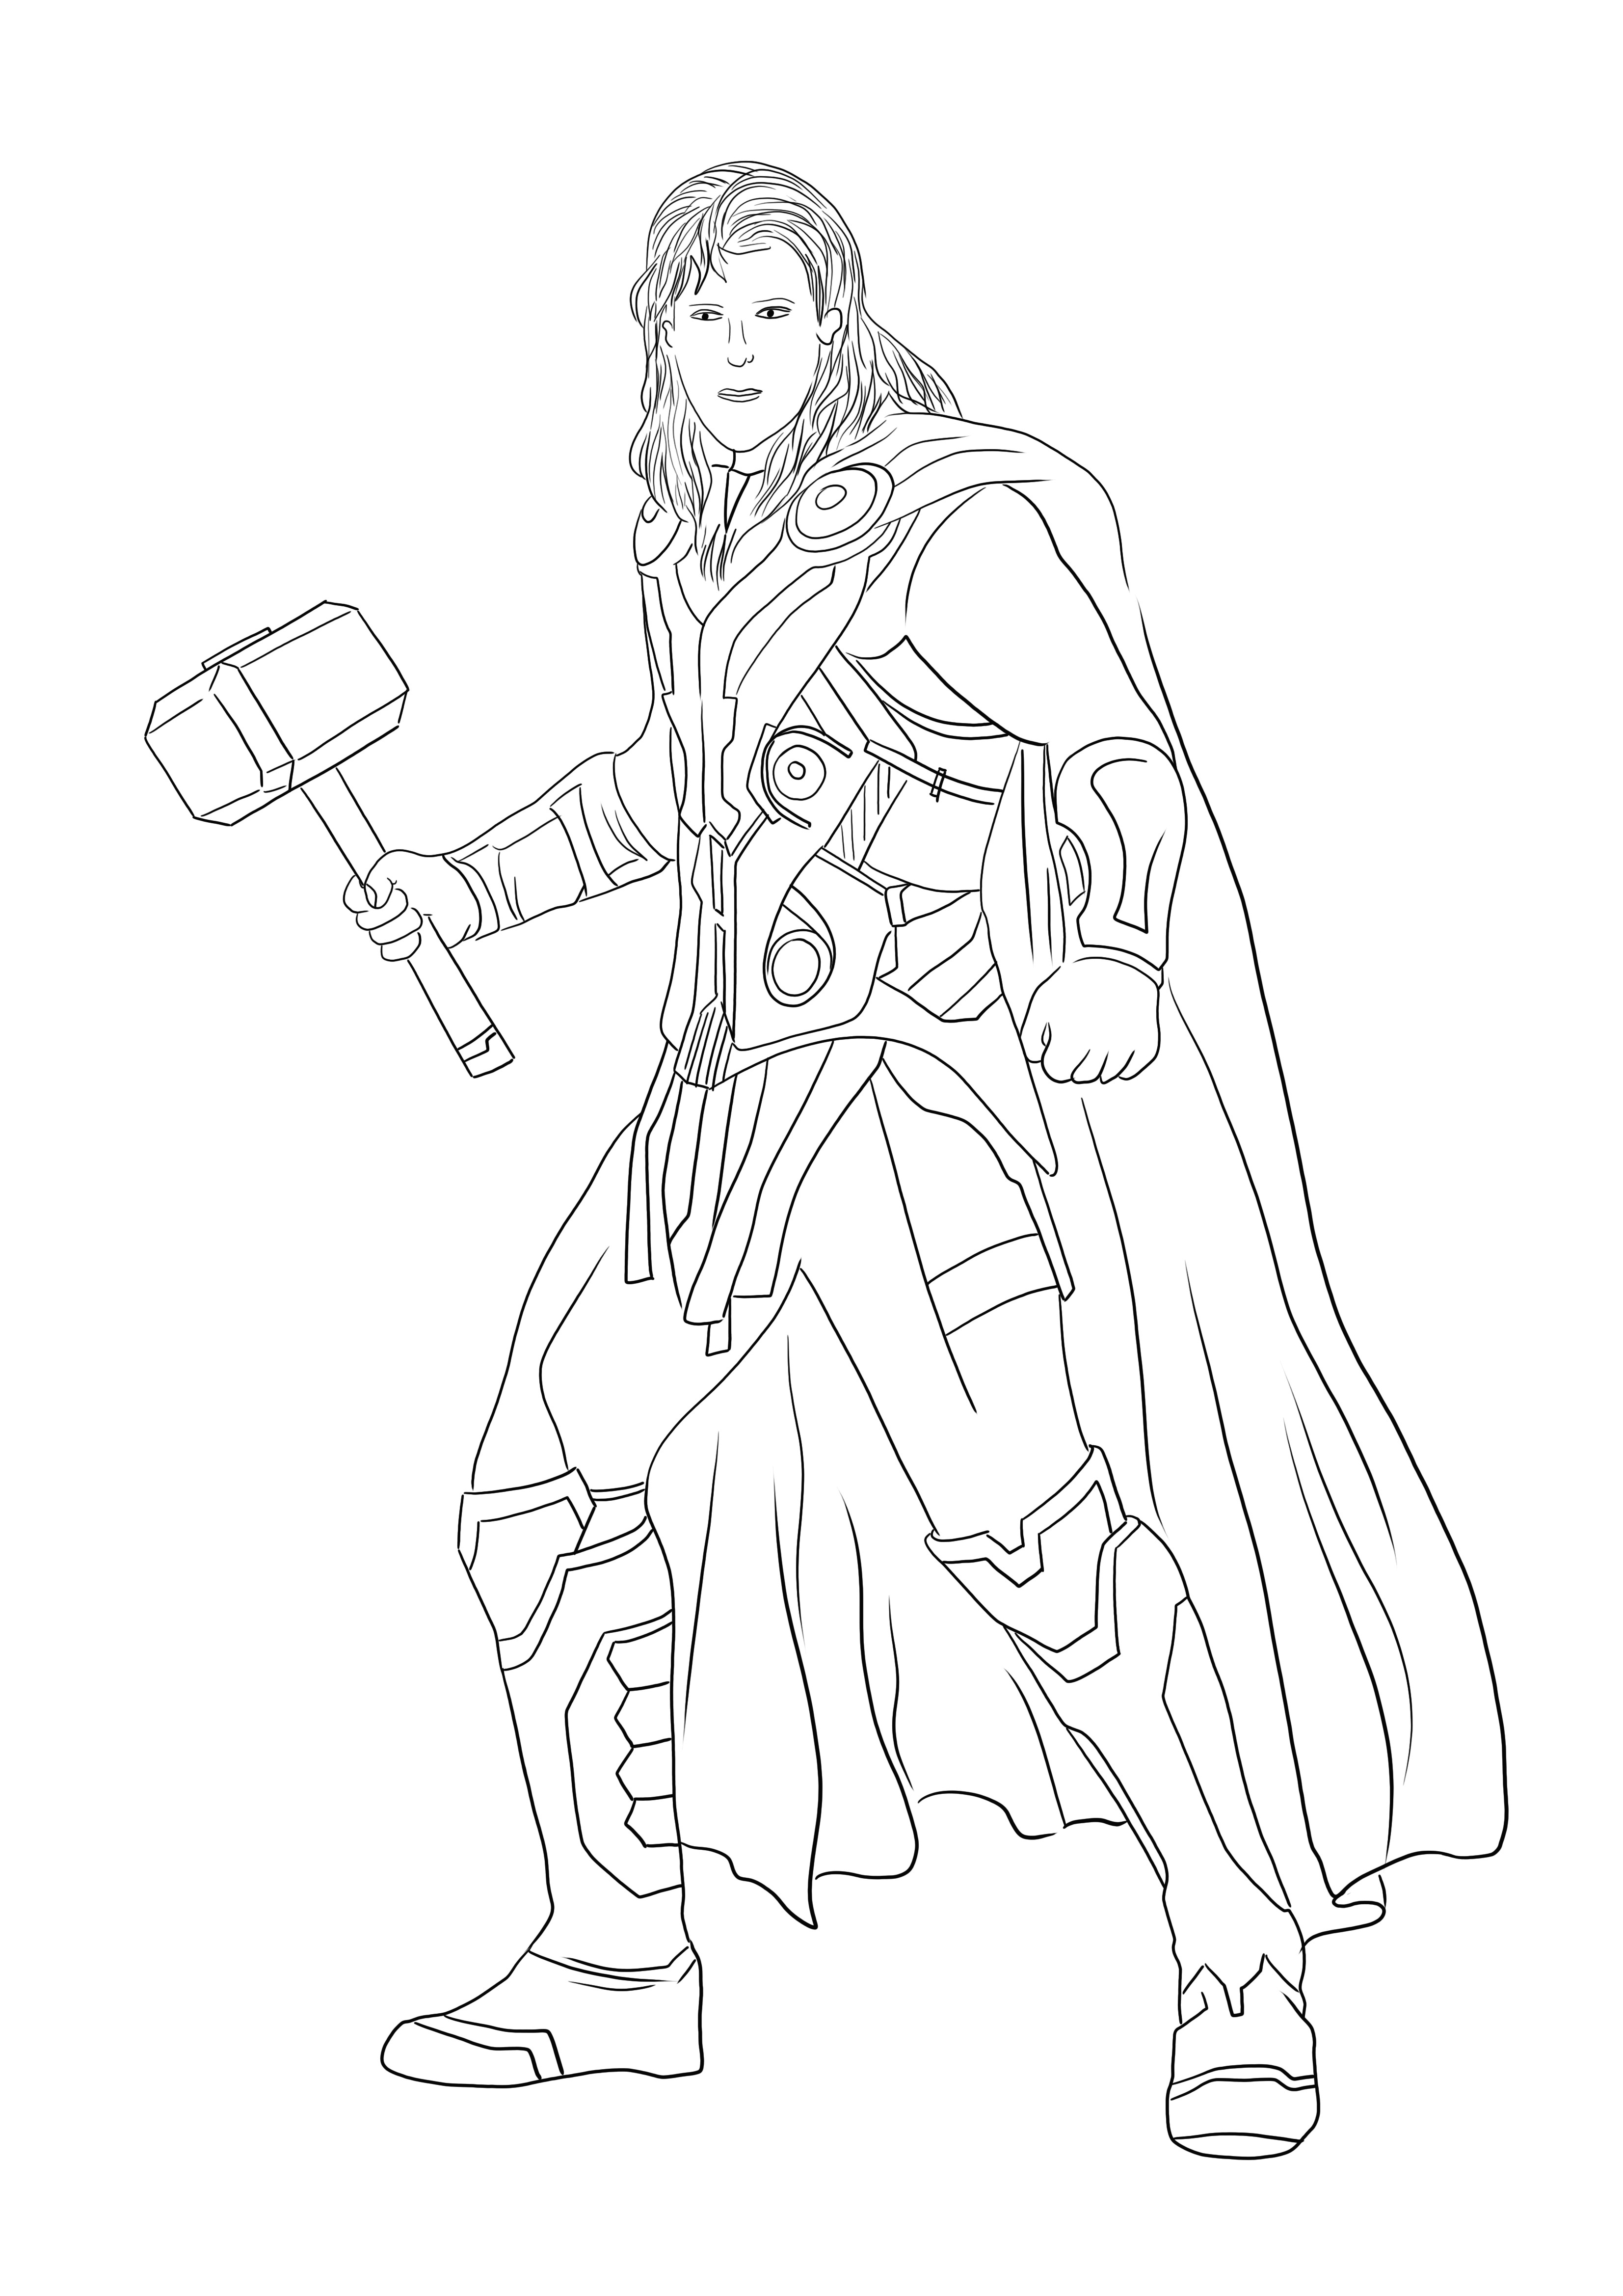 Free  coloring image of Thor from Avengers to download or print for all who love these heroes